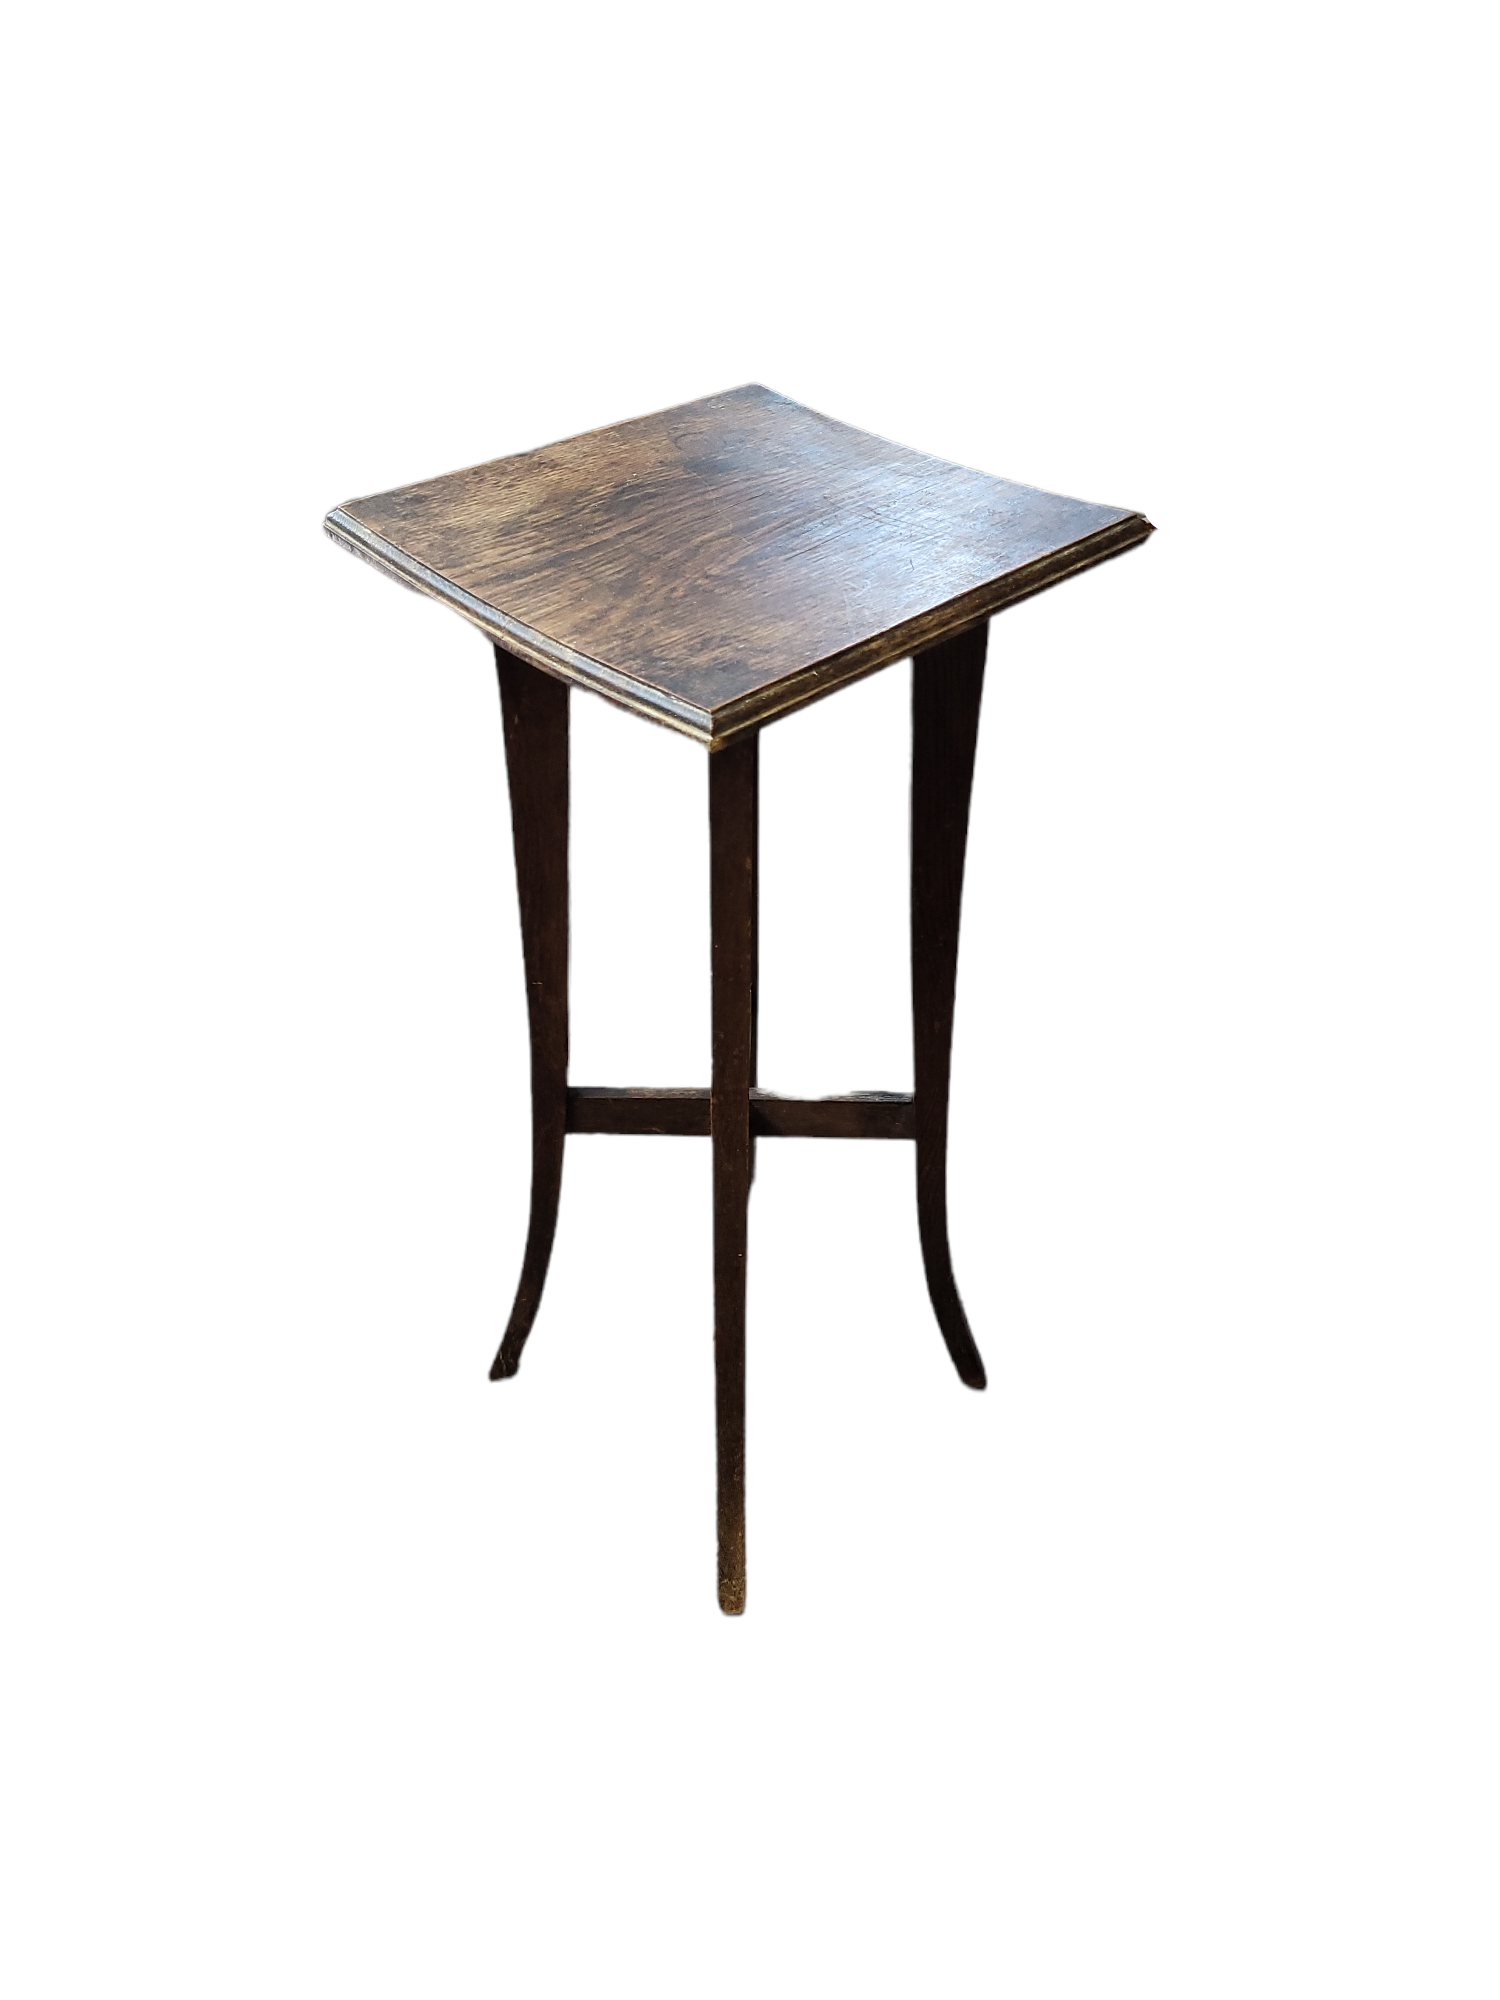 AN EDWARDIAN SQUARE TOP OAK PLANT TABLE On tapering legs. (30cm x 30cm x 72cm) Condition: slight